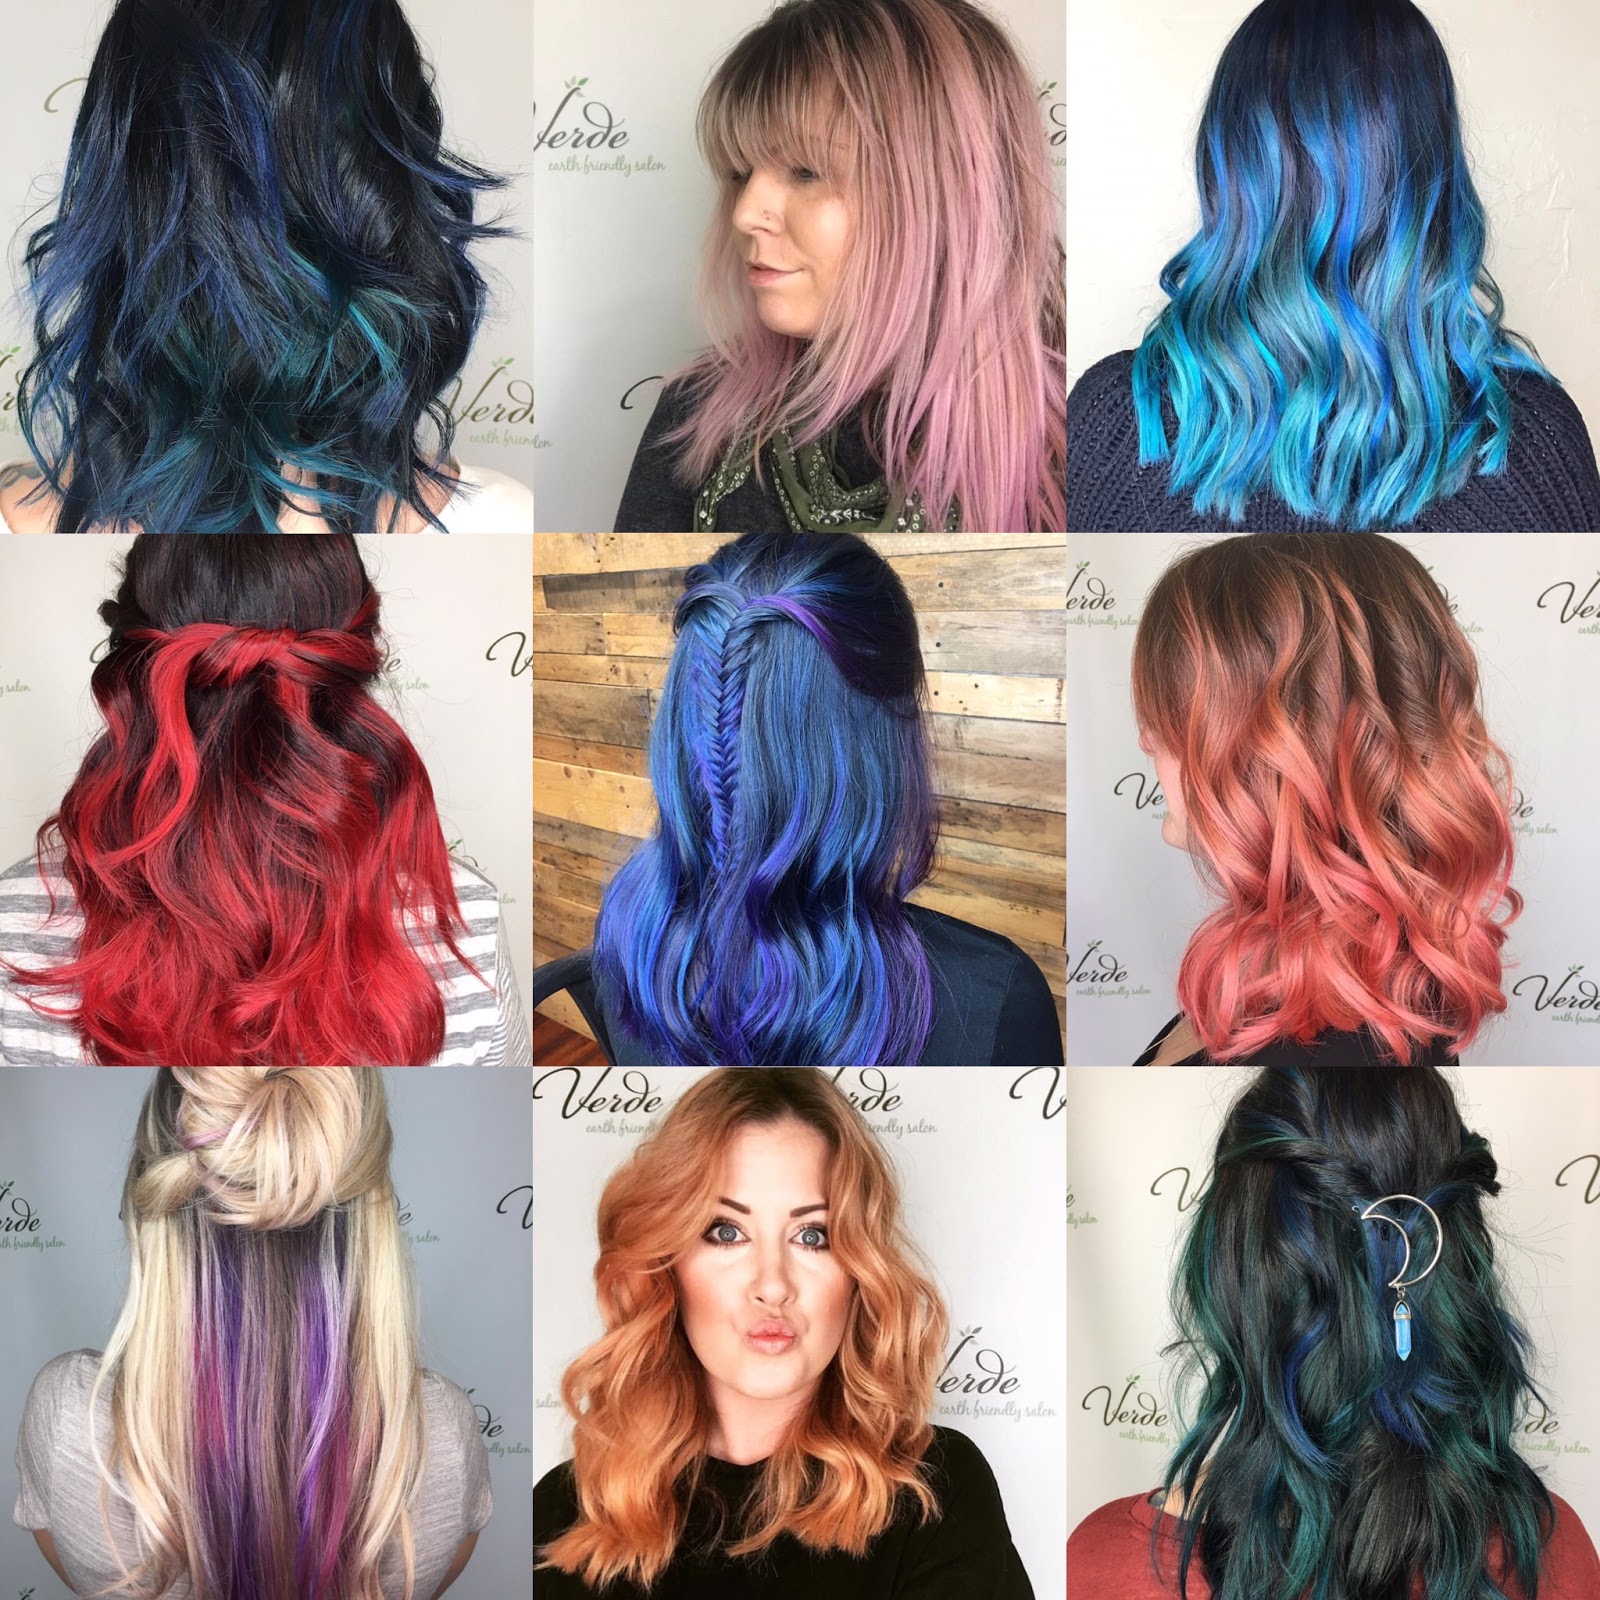 Earth Loving Hair Stylists Share On Hair Makeup Design Living